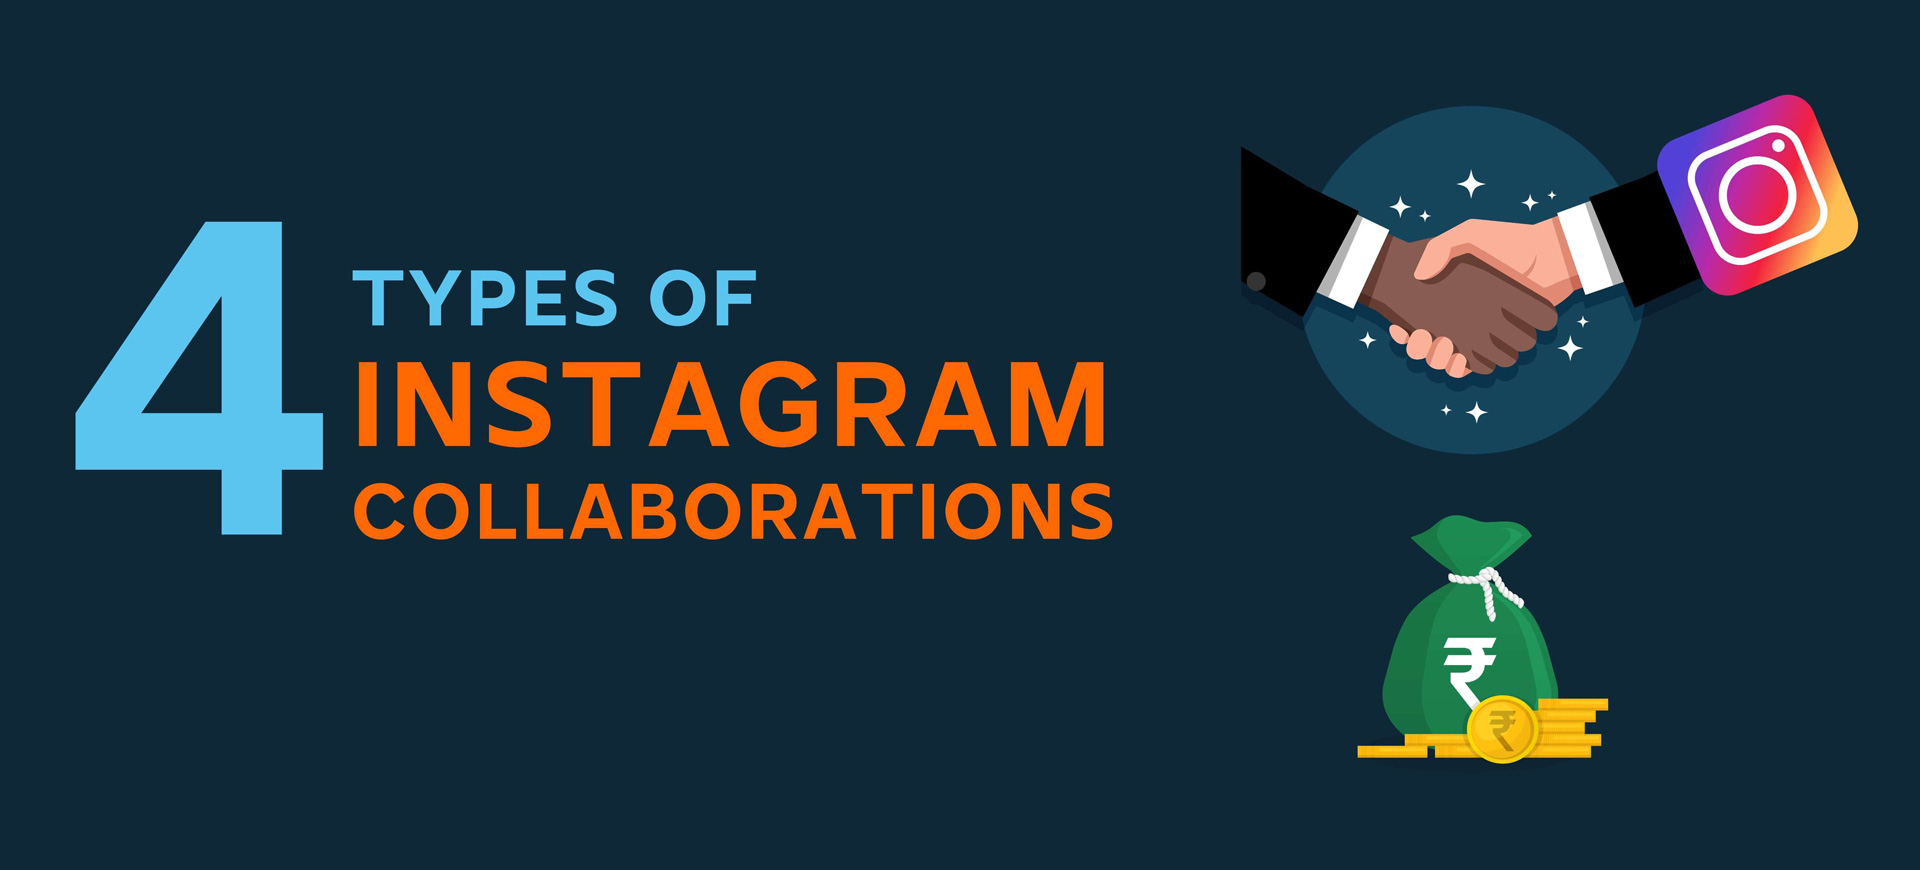 4 Types Of Instagram Collaborations